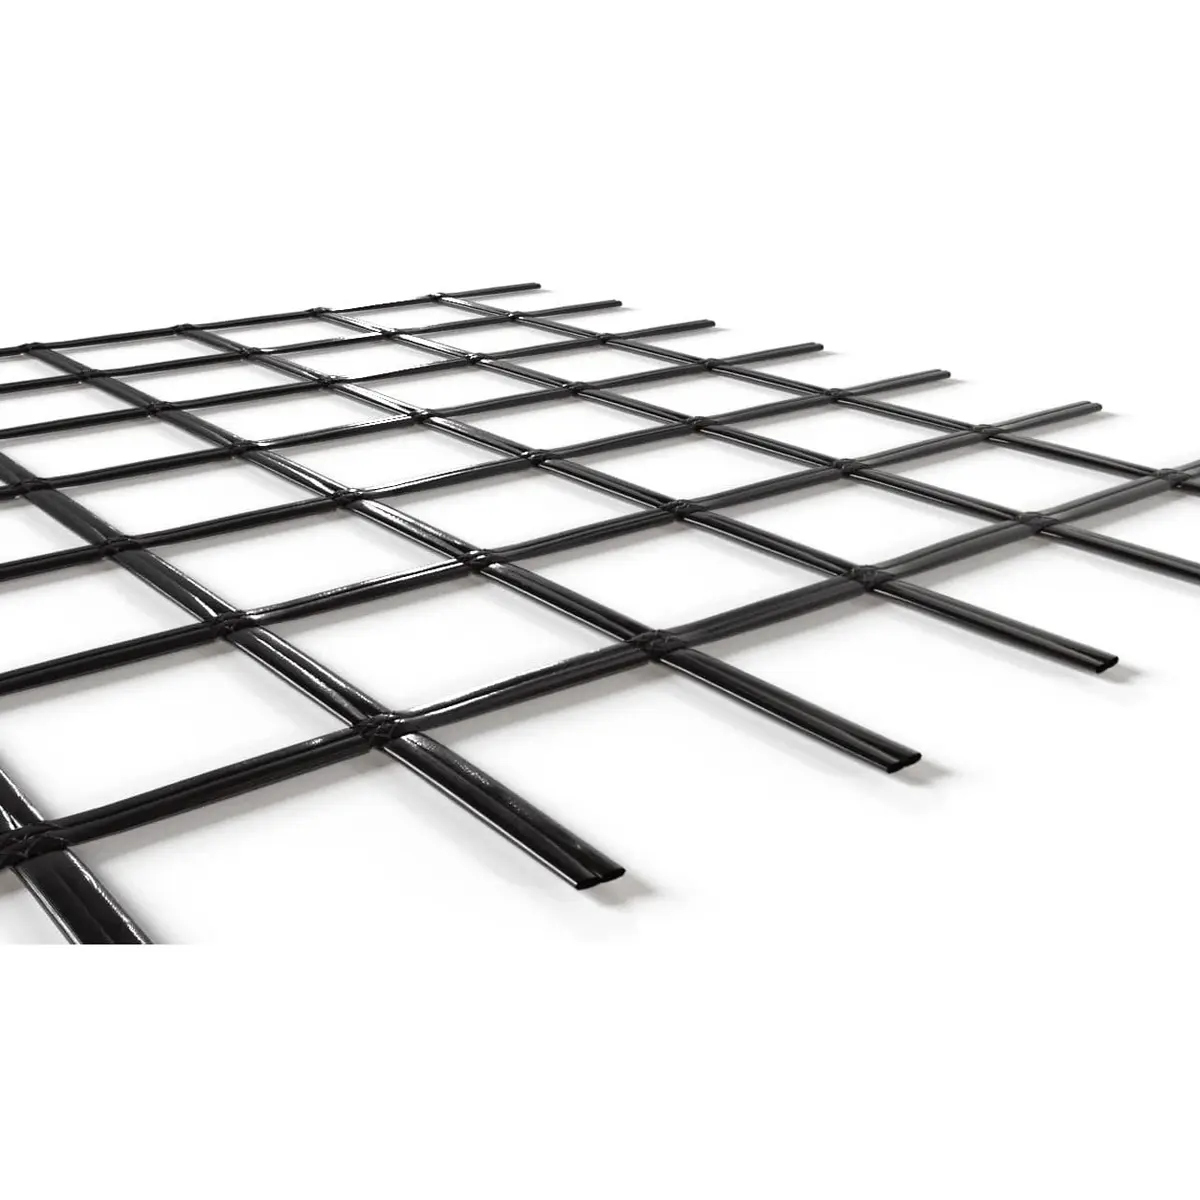 Hot Selling basalt geogrid 50 (25x8) profitable in all respects with sufficient tensile strength